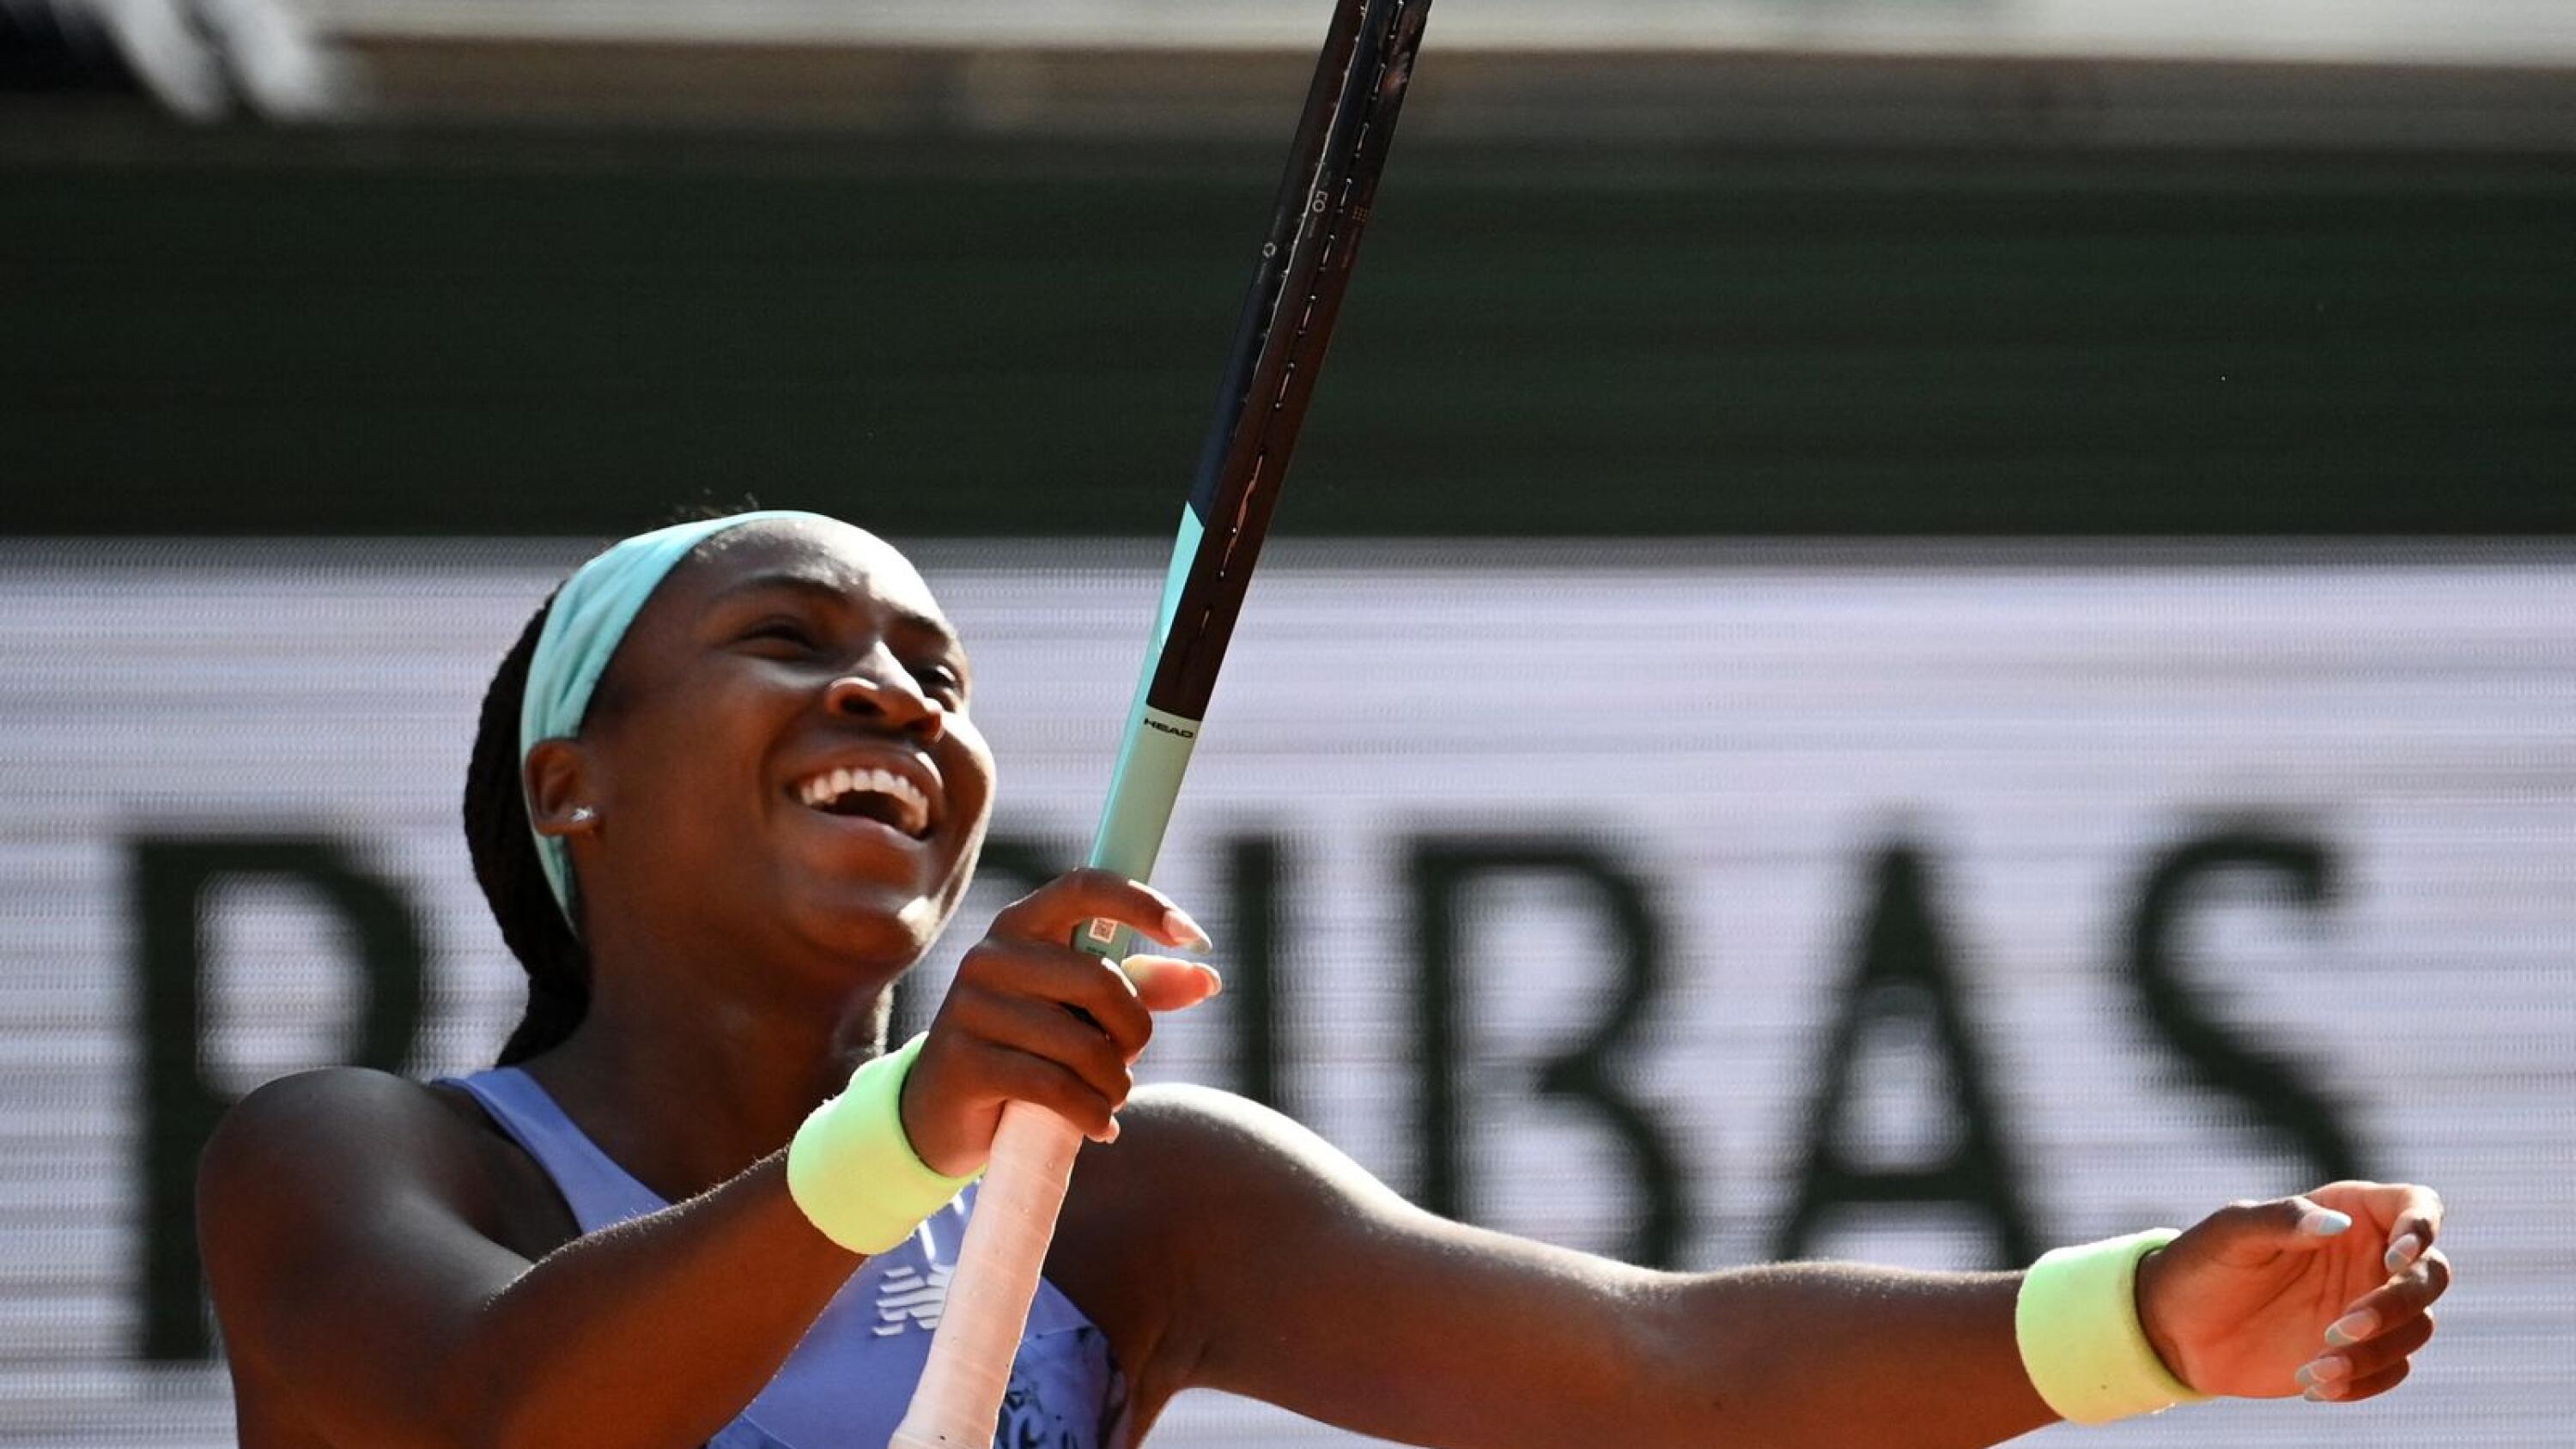 US' Coco Gauff reacts after winning against Italy's Martina Trevisan at the end of their women's semi-final singles match on day twelve of the Roland-Garros Open tennis tournament at the Court Philippe-Chatrier in Paris on Thursday